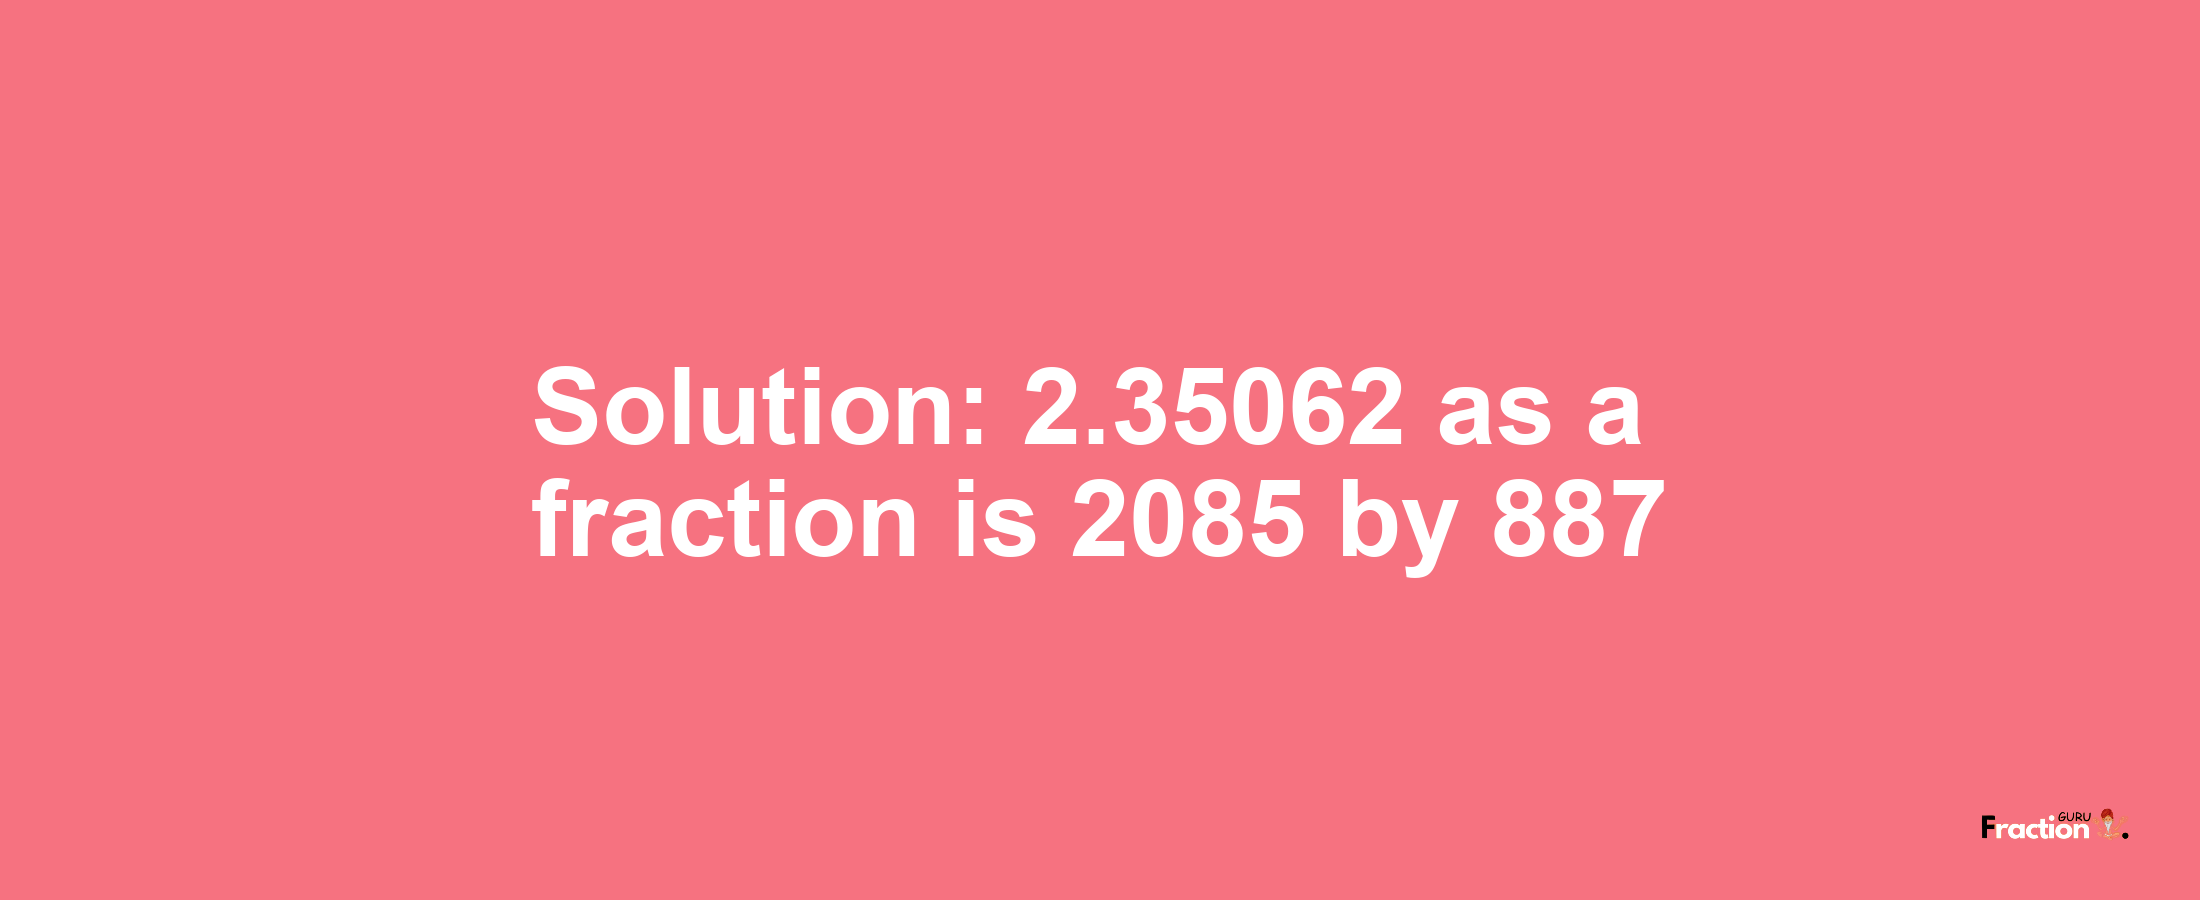 Solution:2.35062 as a fraction is 2085/887